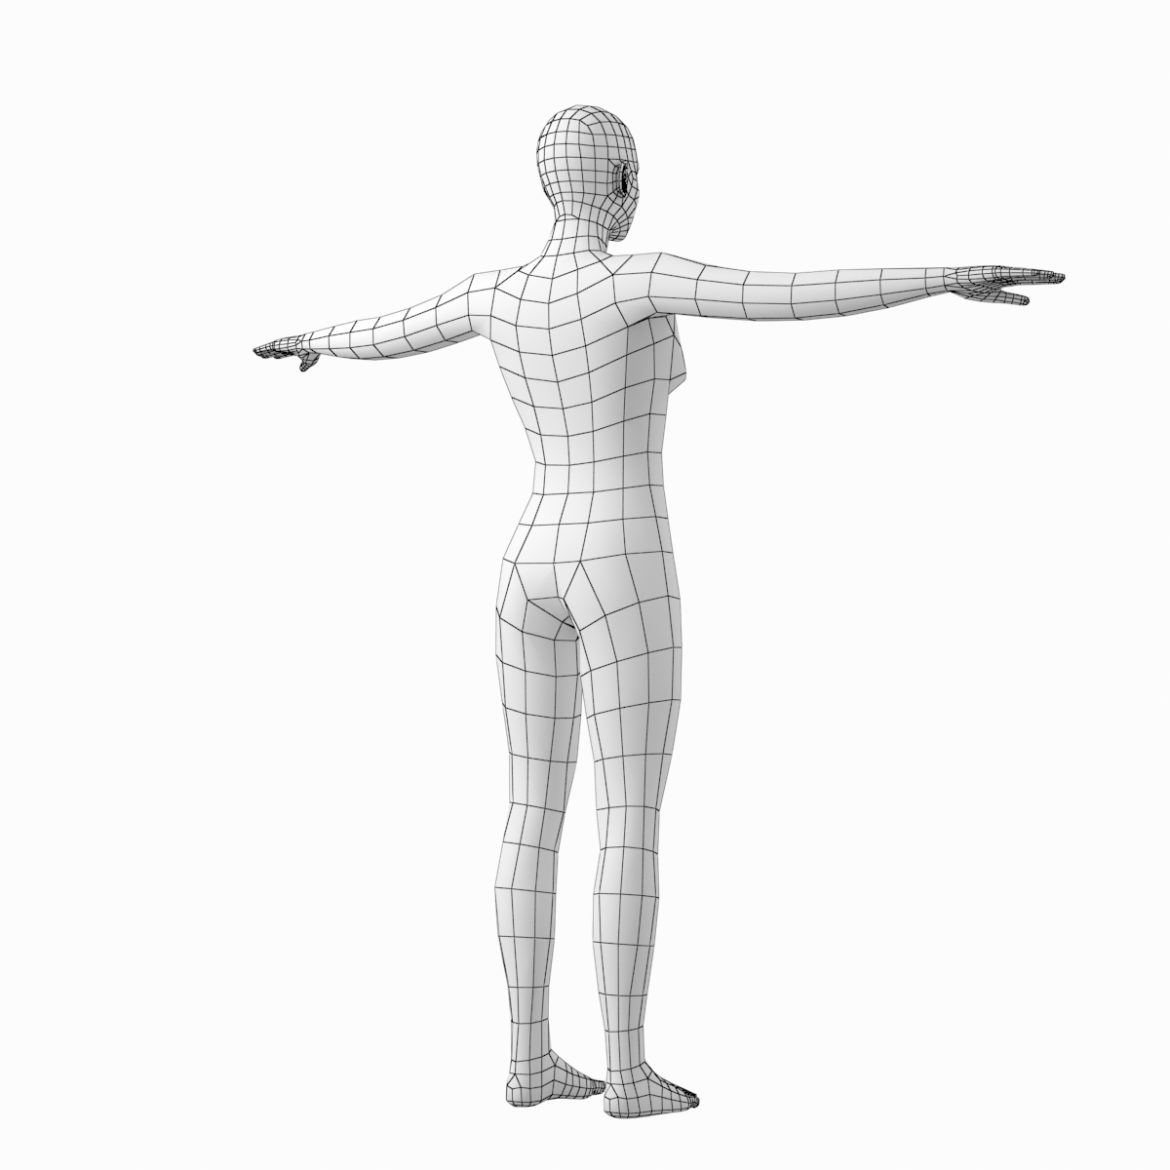  <a class="continue" href="https://www.flatpyramid.com/3d-models/characters-3d-models/human-types/female/female-base-mesh-natural-proportions-in-t-pose/">Continue Reading<span> Female Base Mesh Natural Proportions in T-Pose</span></a>